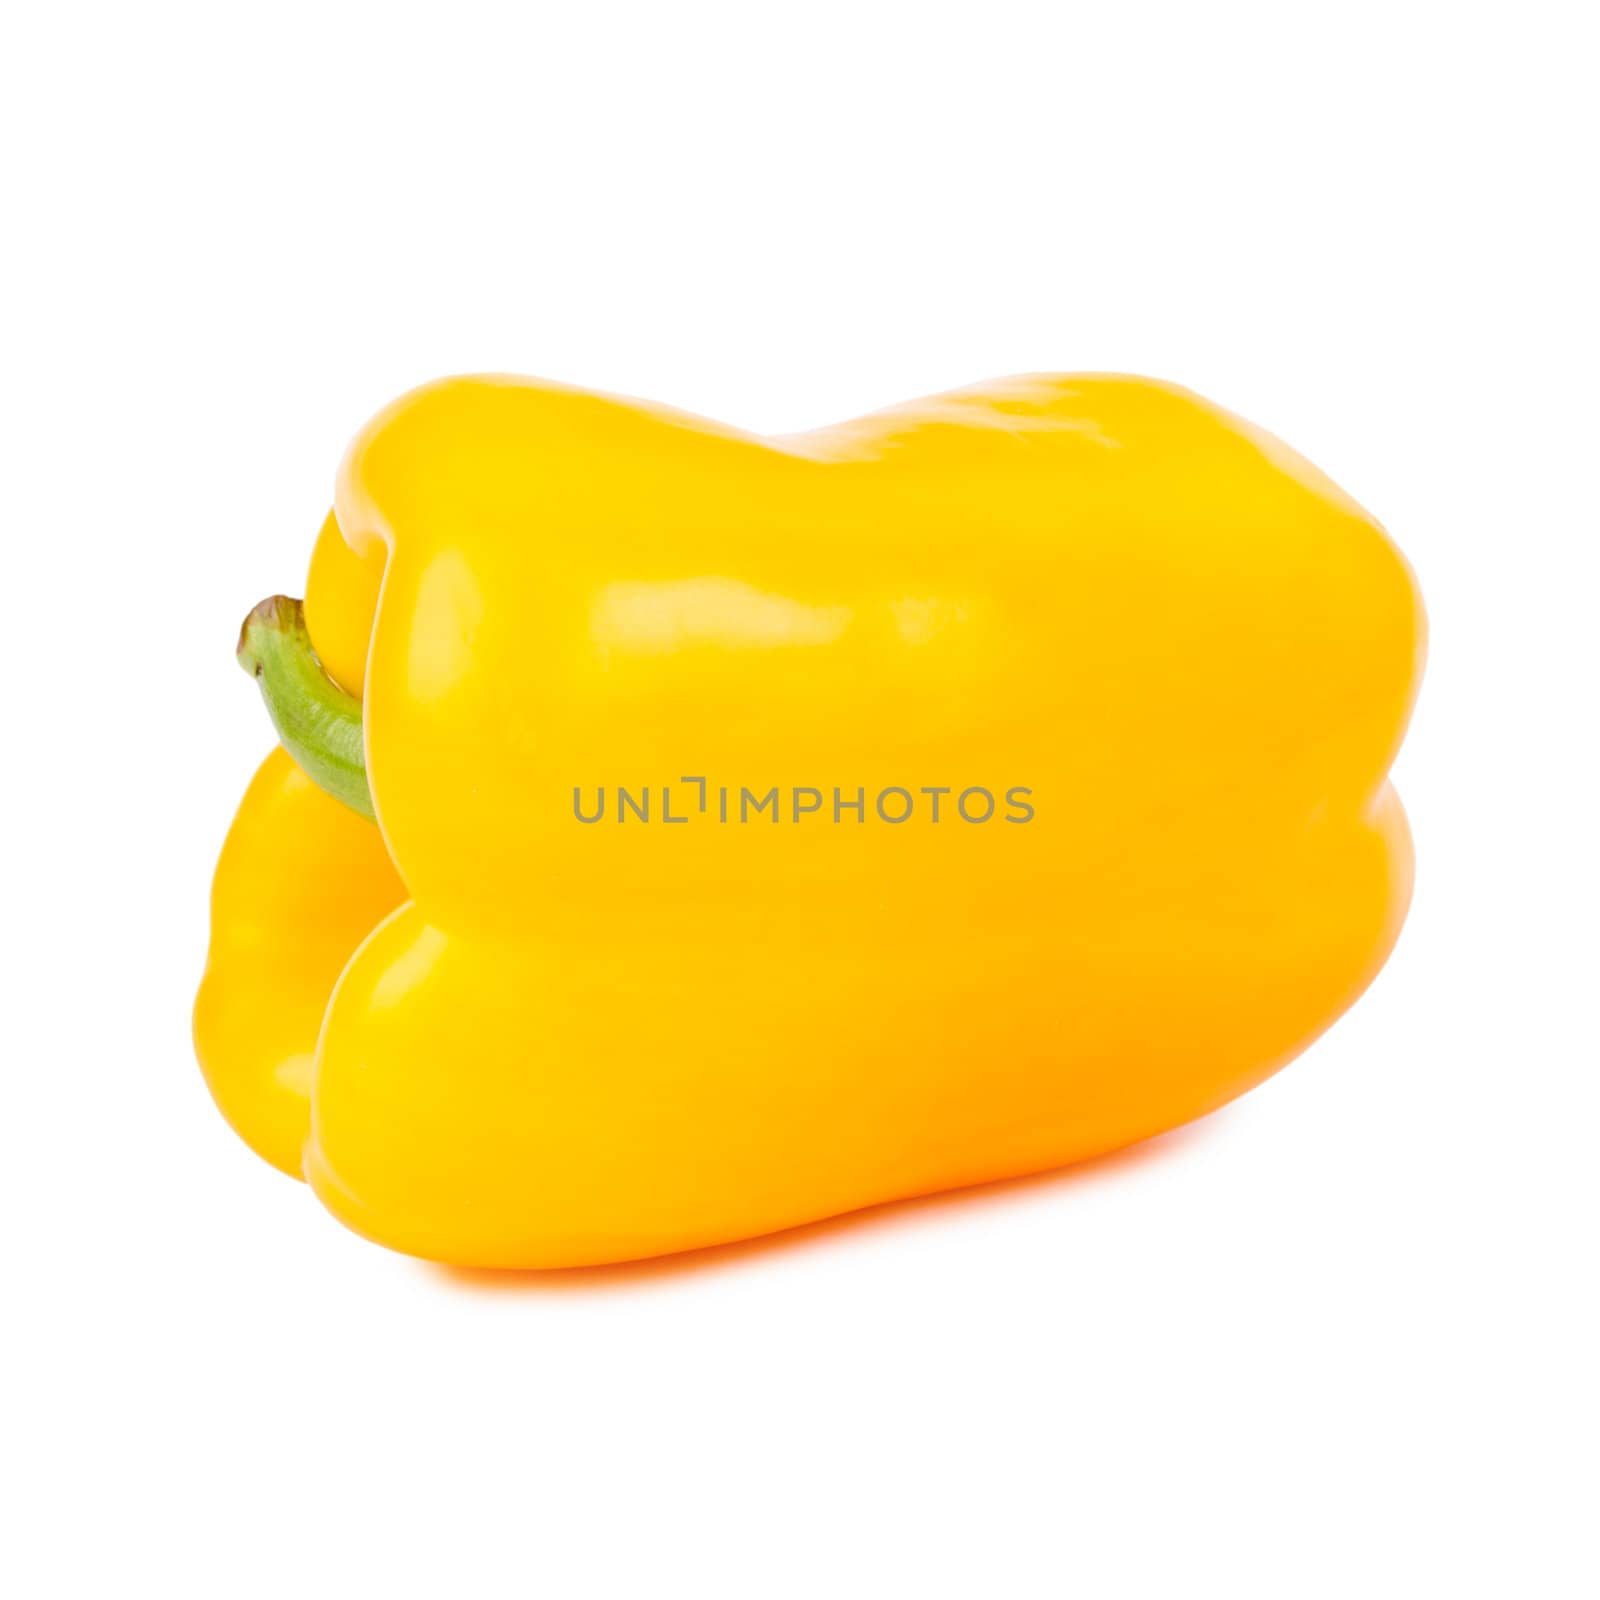 Yellow bell pepper isolated on white background